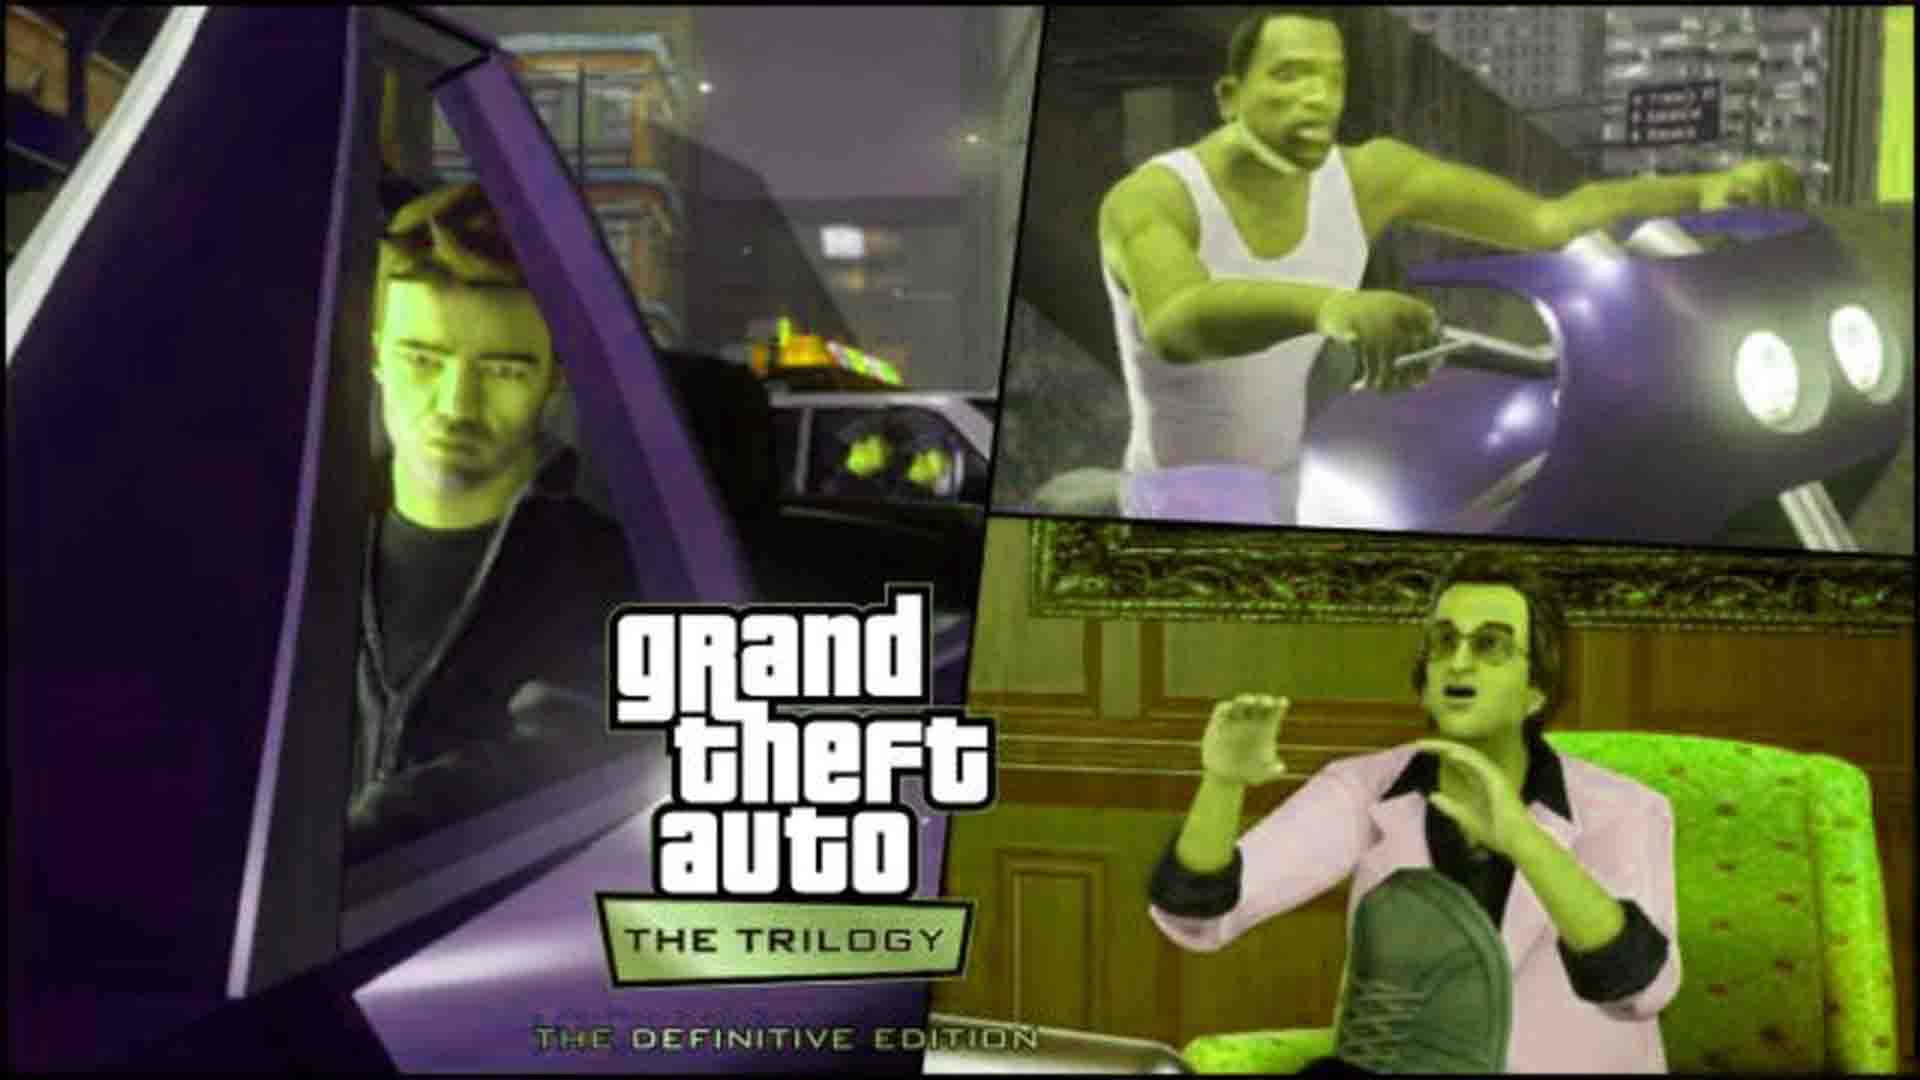 GTA Trilogy has removed some cheats from San Andreas